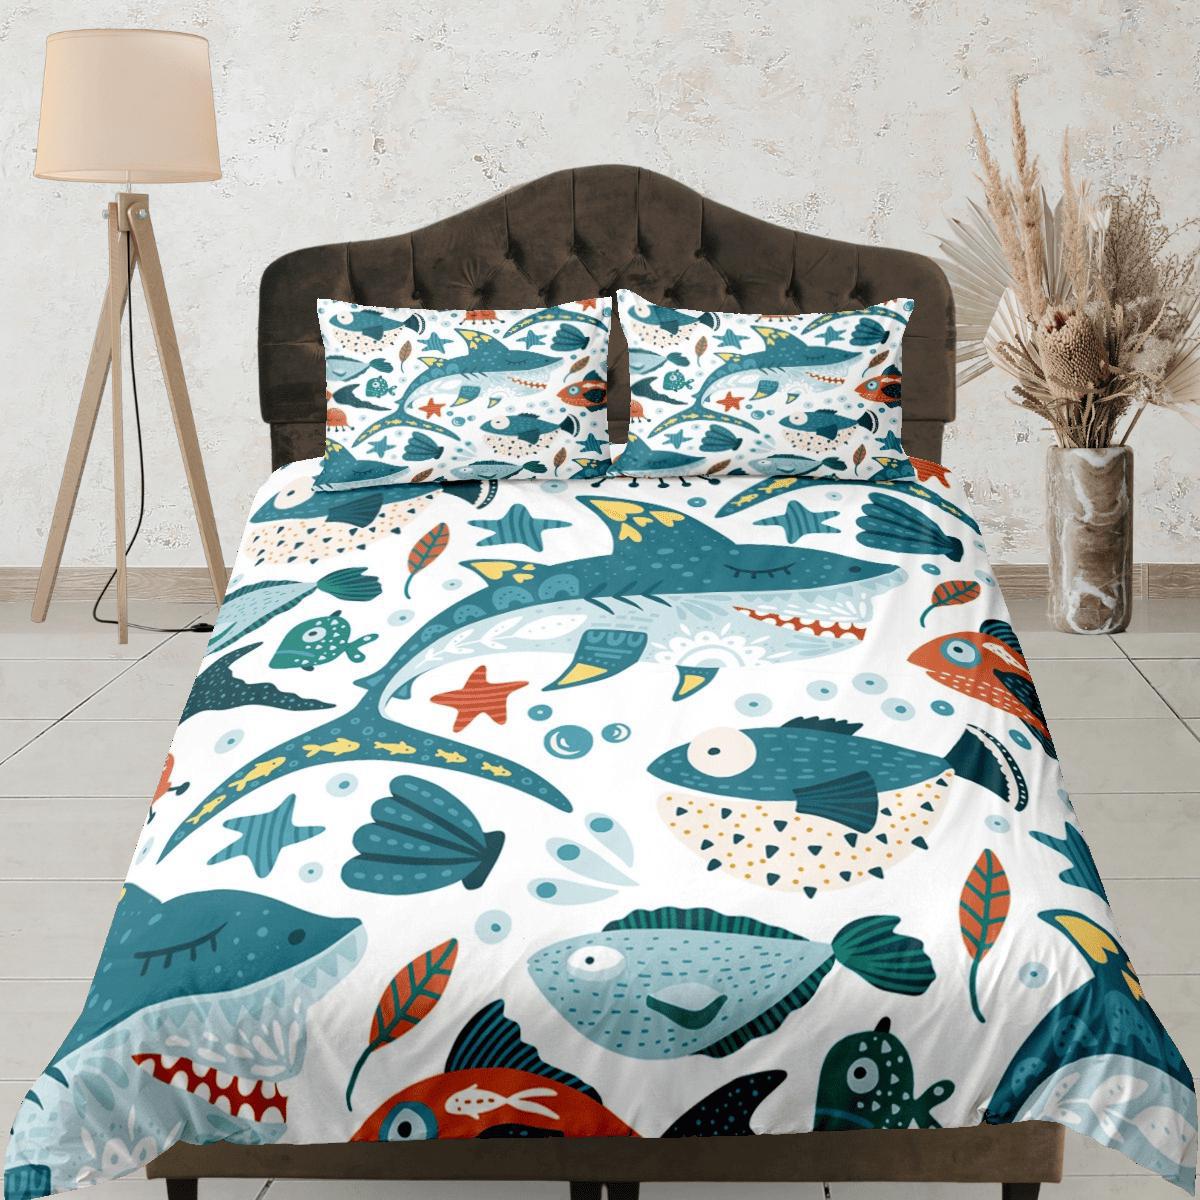 daintyduvet Sharks & Fishes Cute Duvet Cover Set Colorful Bedspread, Kids Full Bedding Set with Pillowcase, Comforter Cover Twin